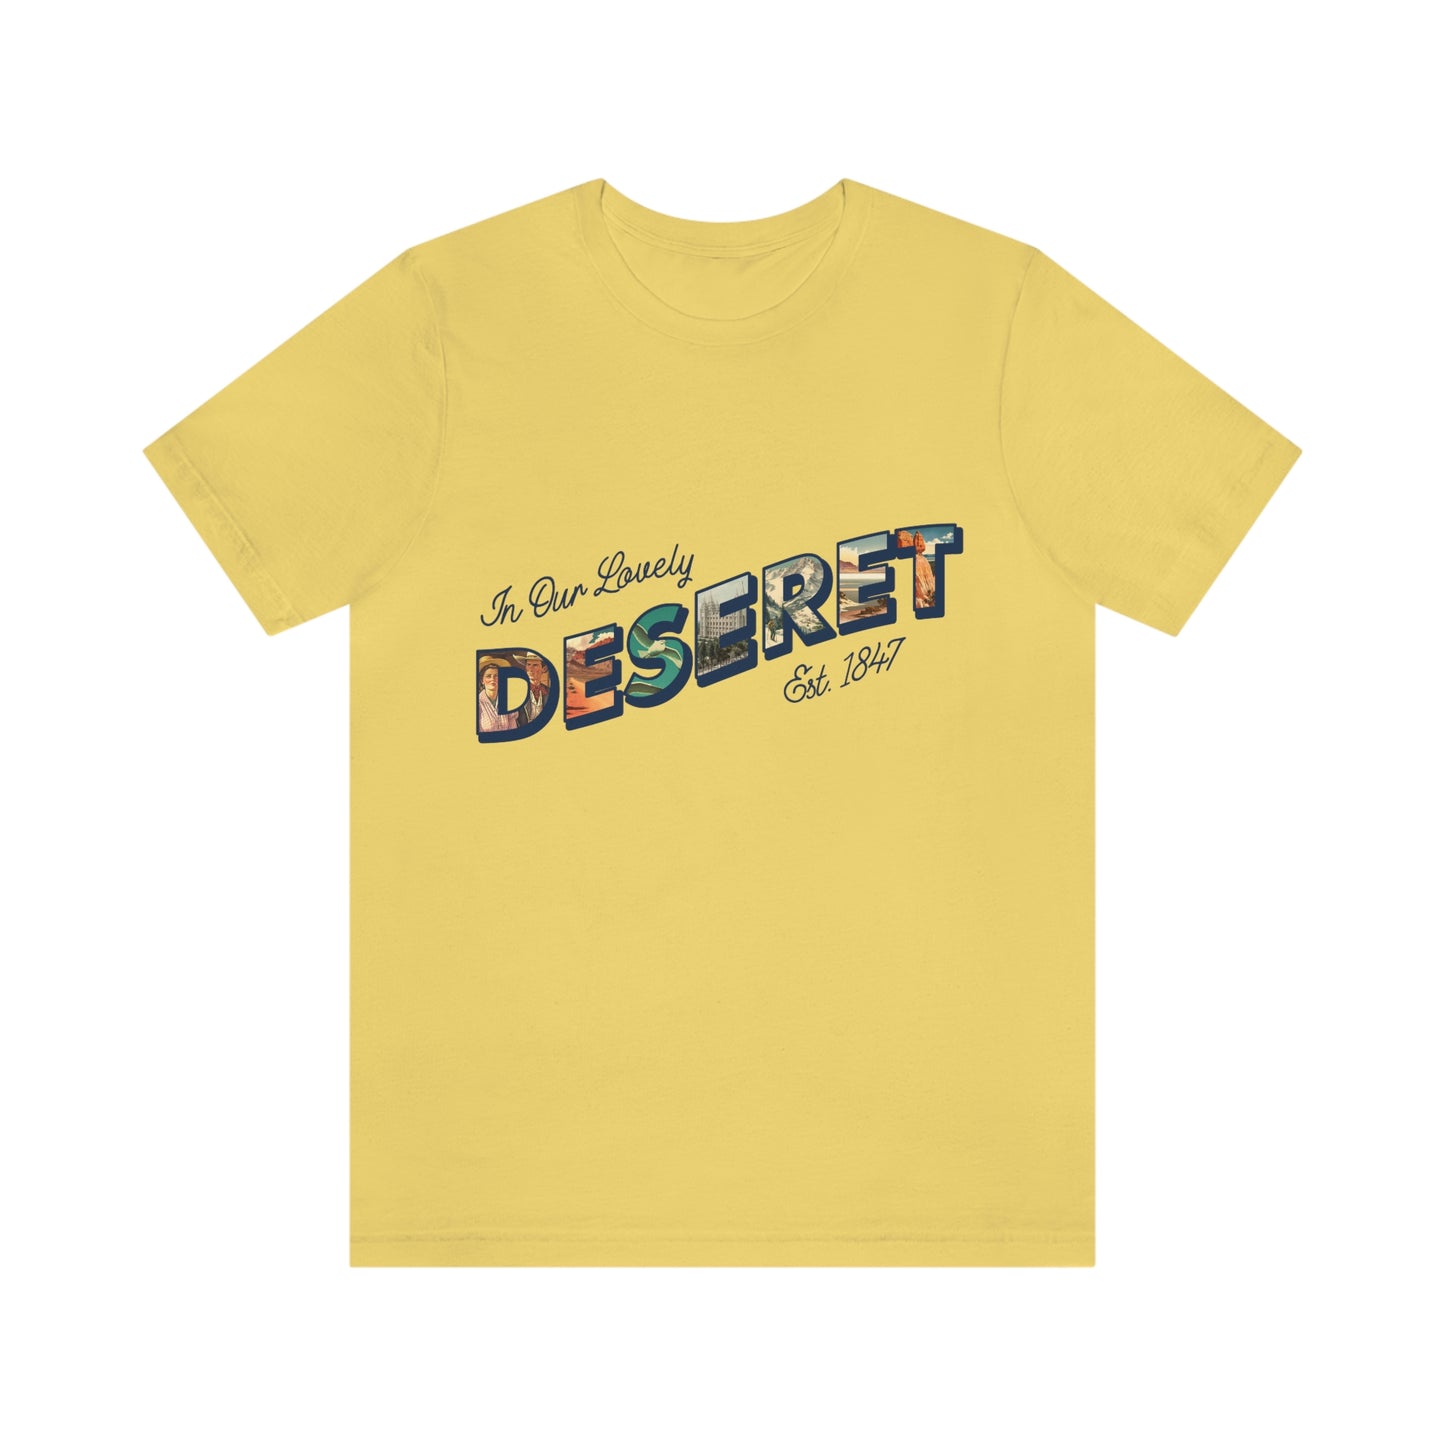 In Our Lovely Deseret T-Shirt